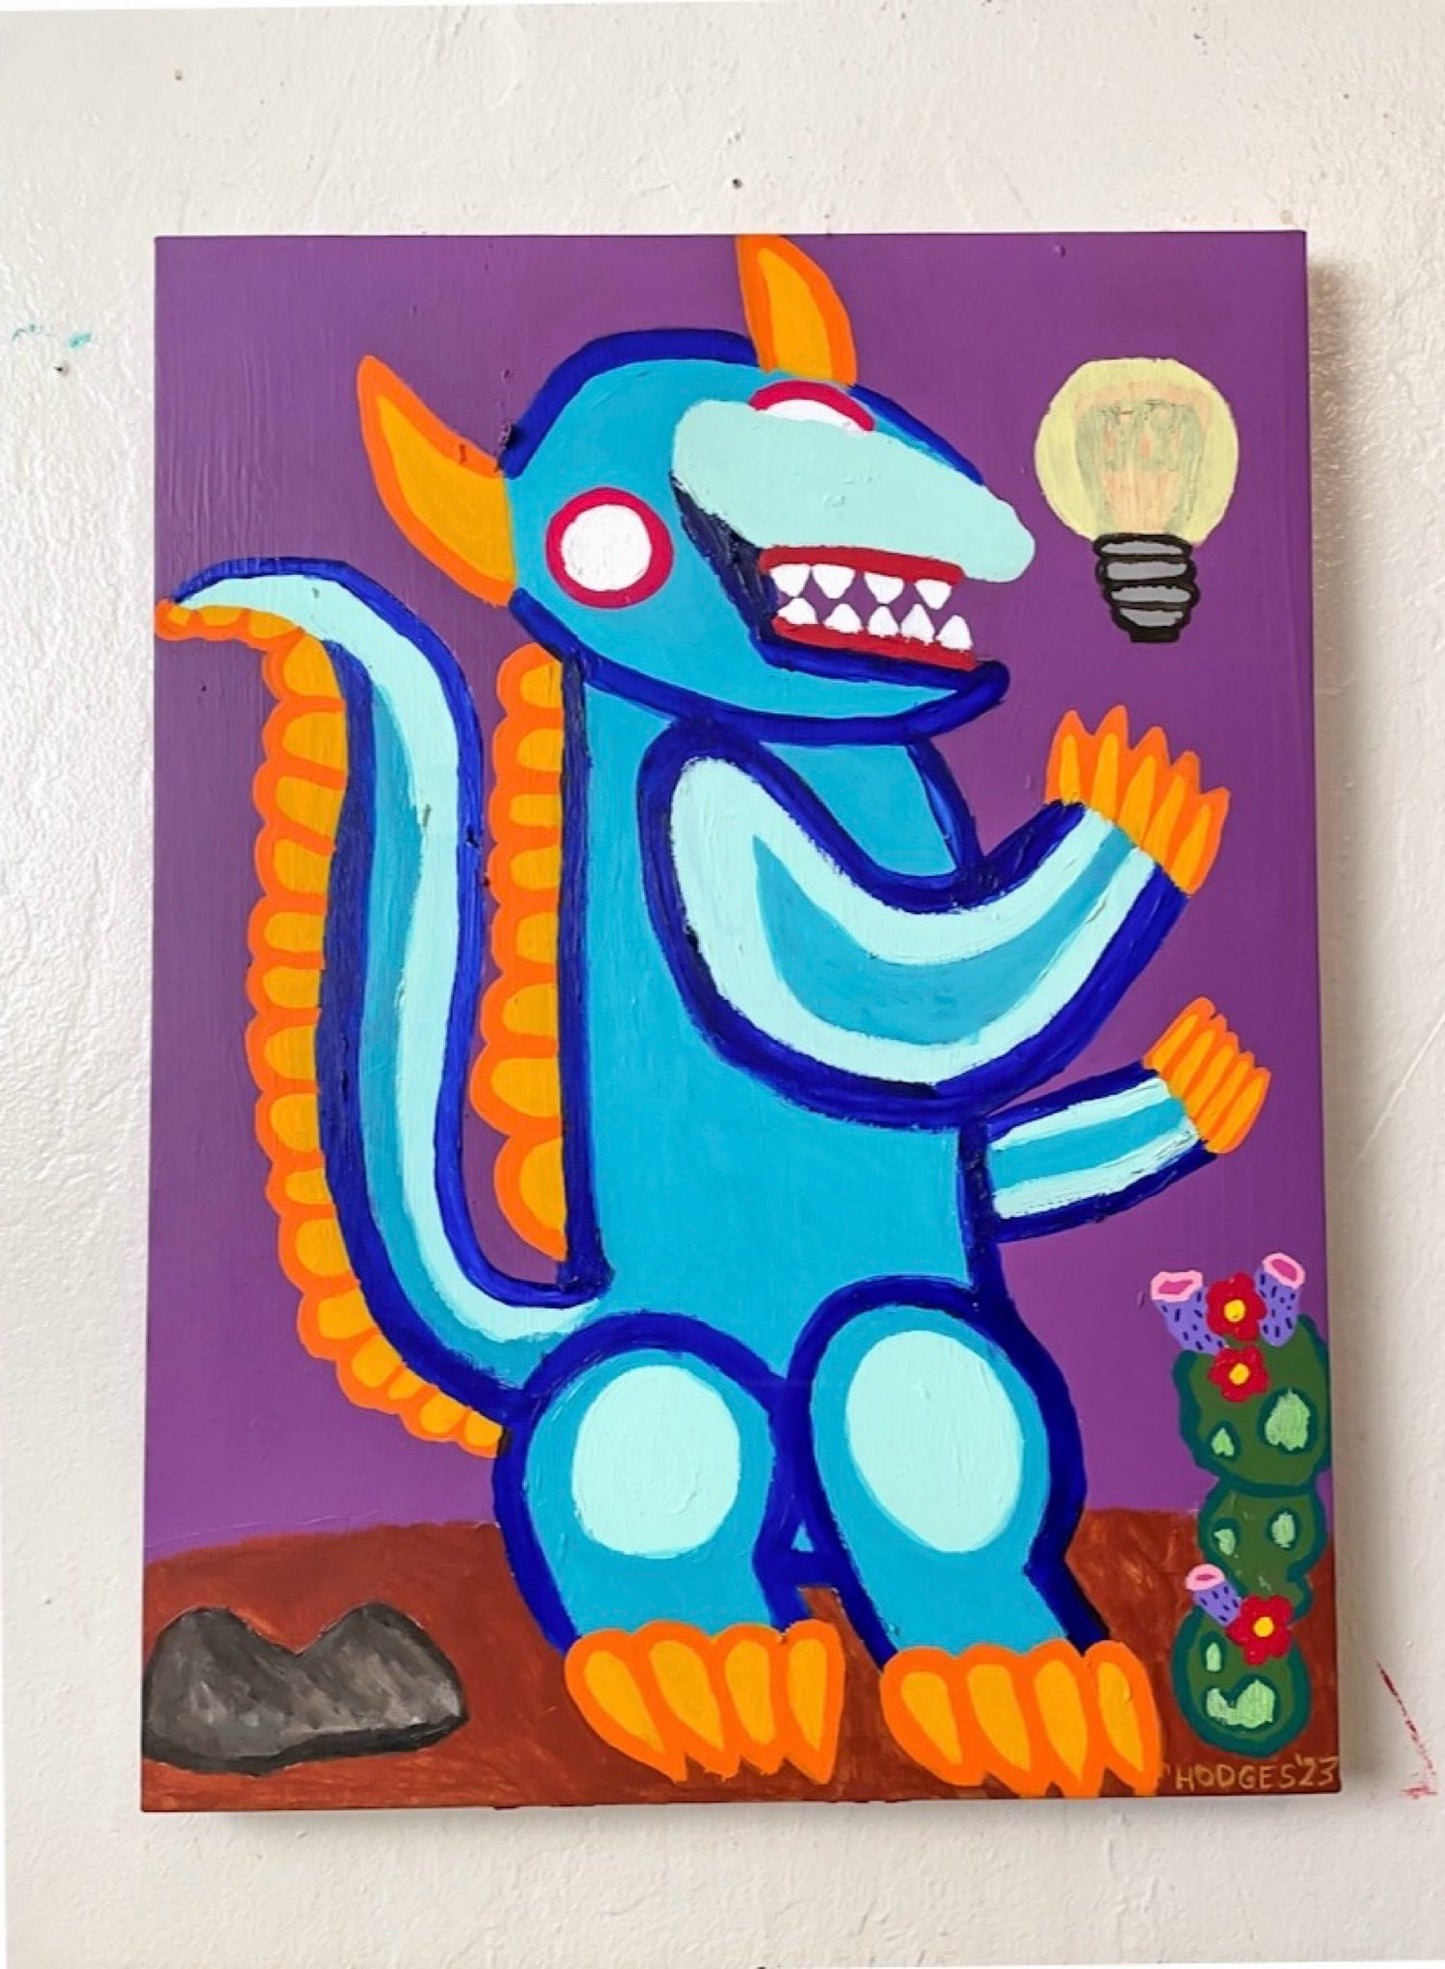 “The Blue Dinosaur I’ve Been Carrying Around in My Head the Last Few Days, Processing" - Painting